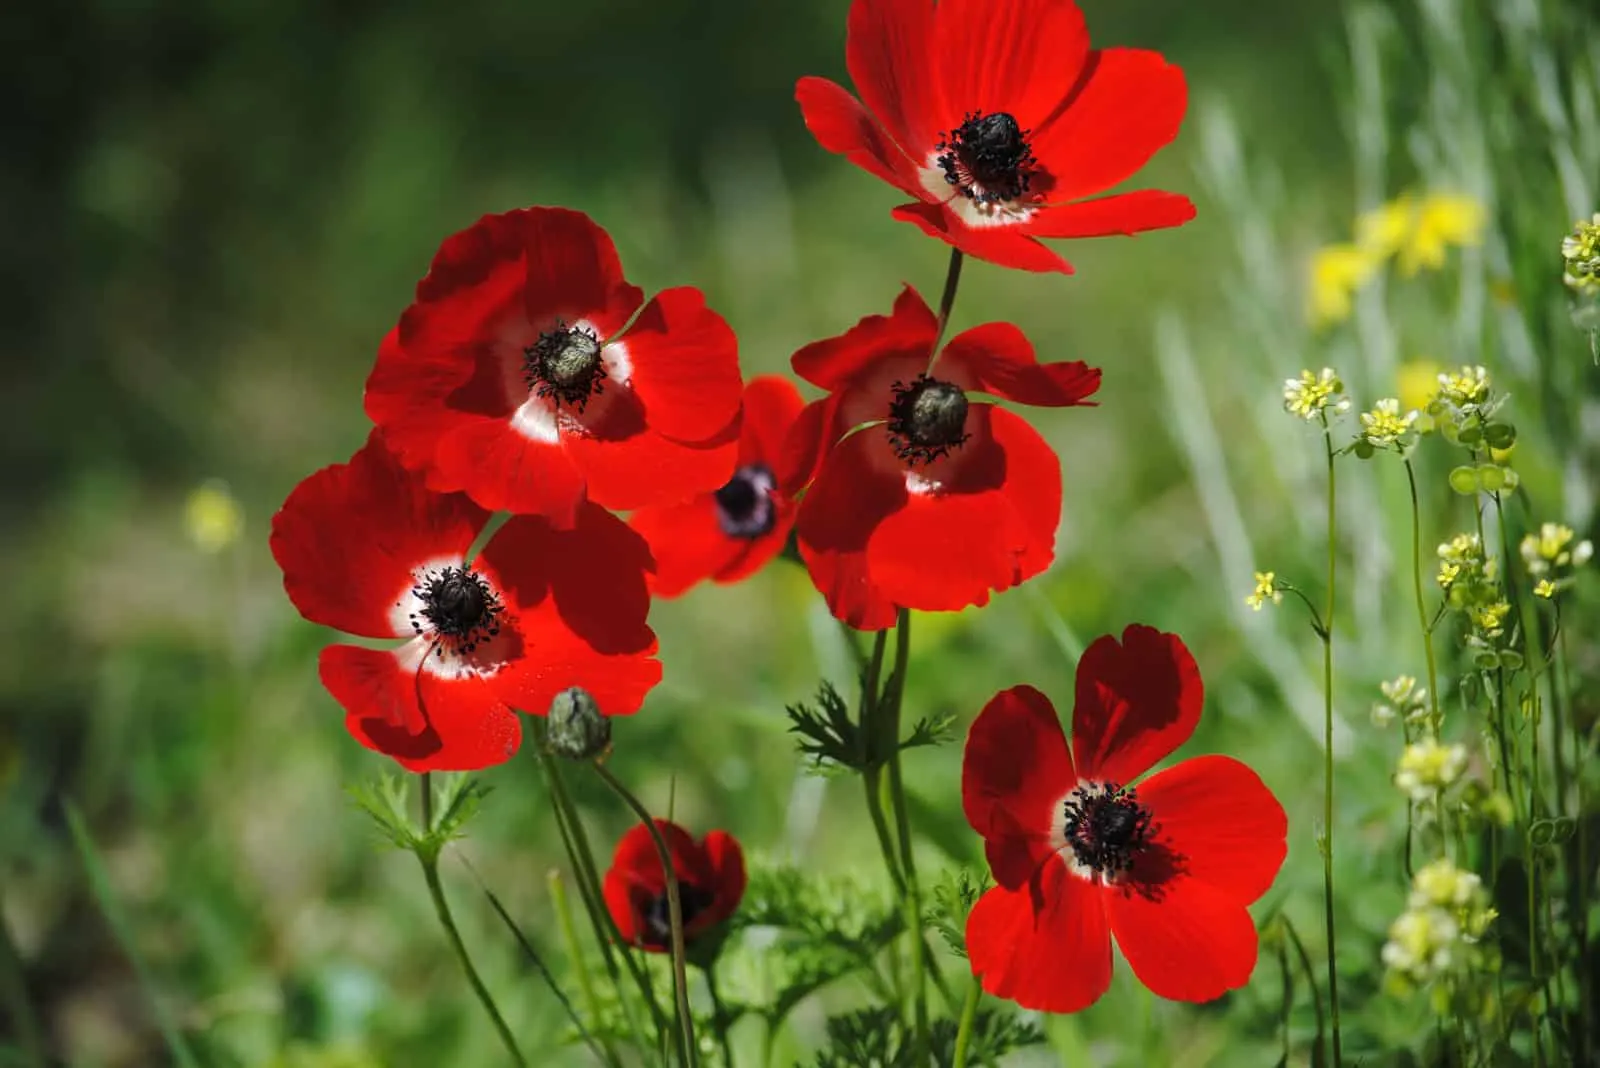 Red Anemone flowers in the field